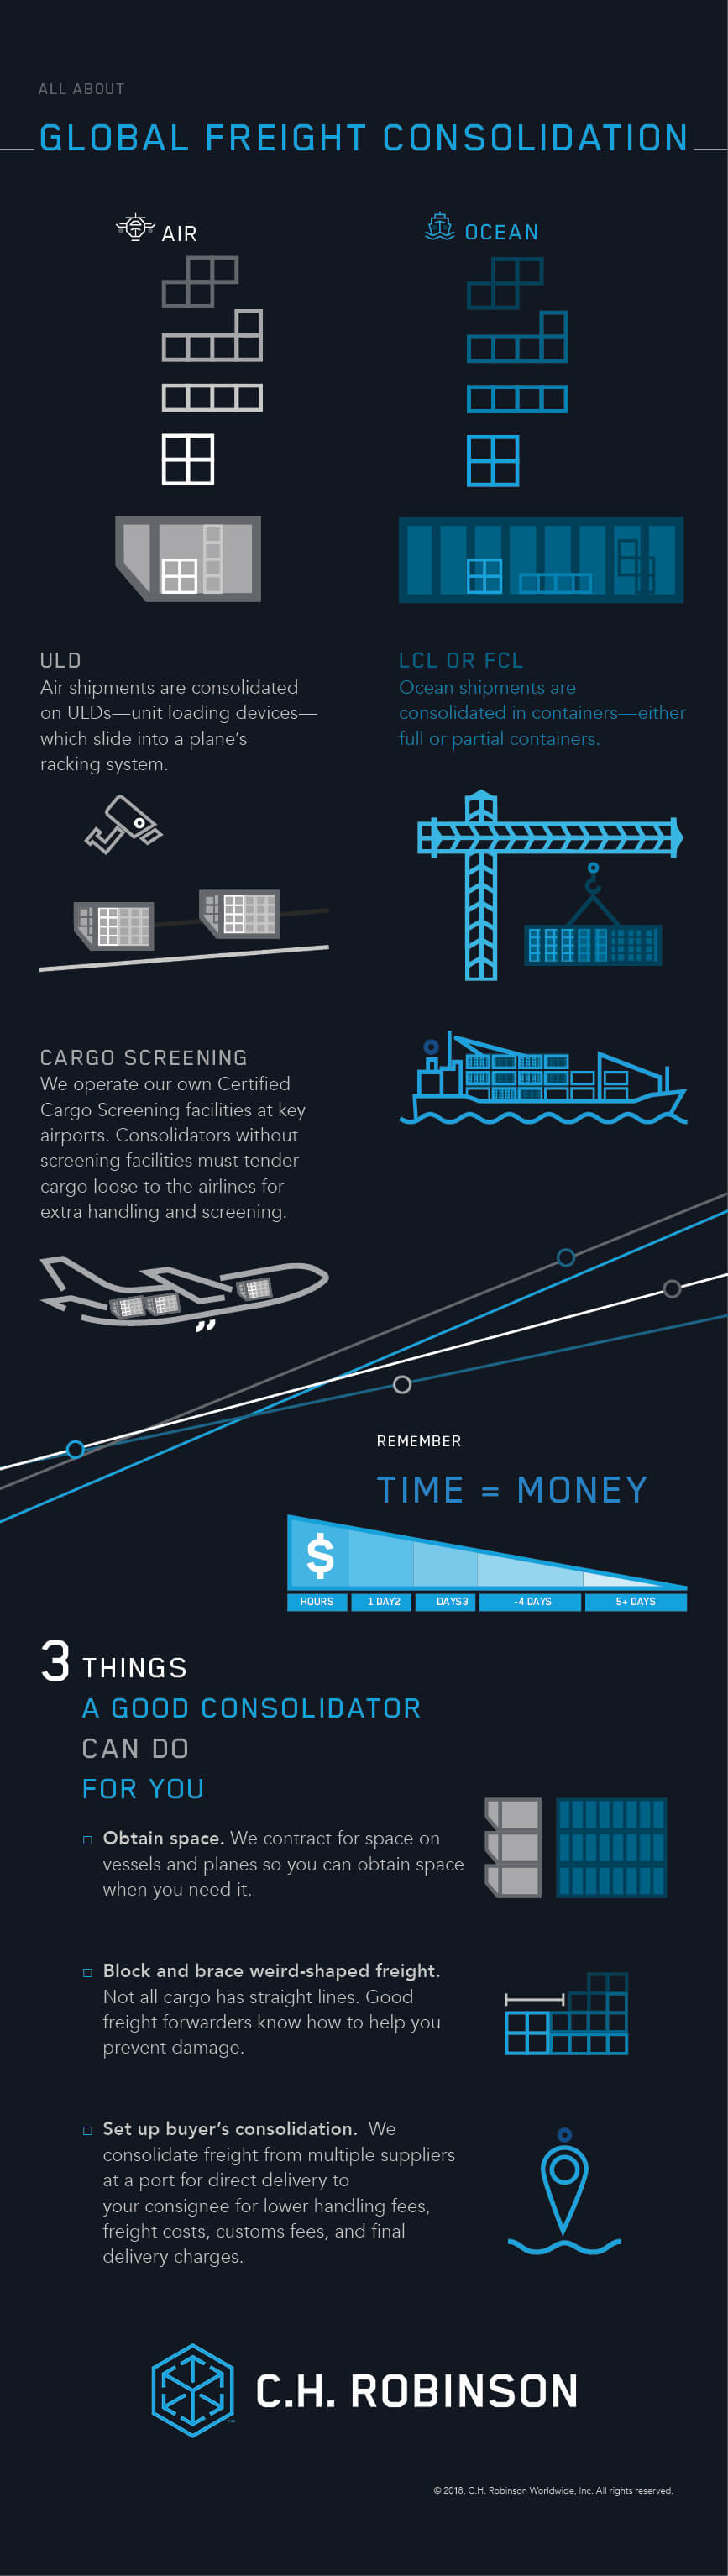 Global benefits of freight consolidation infographic